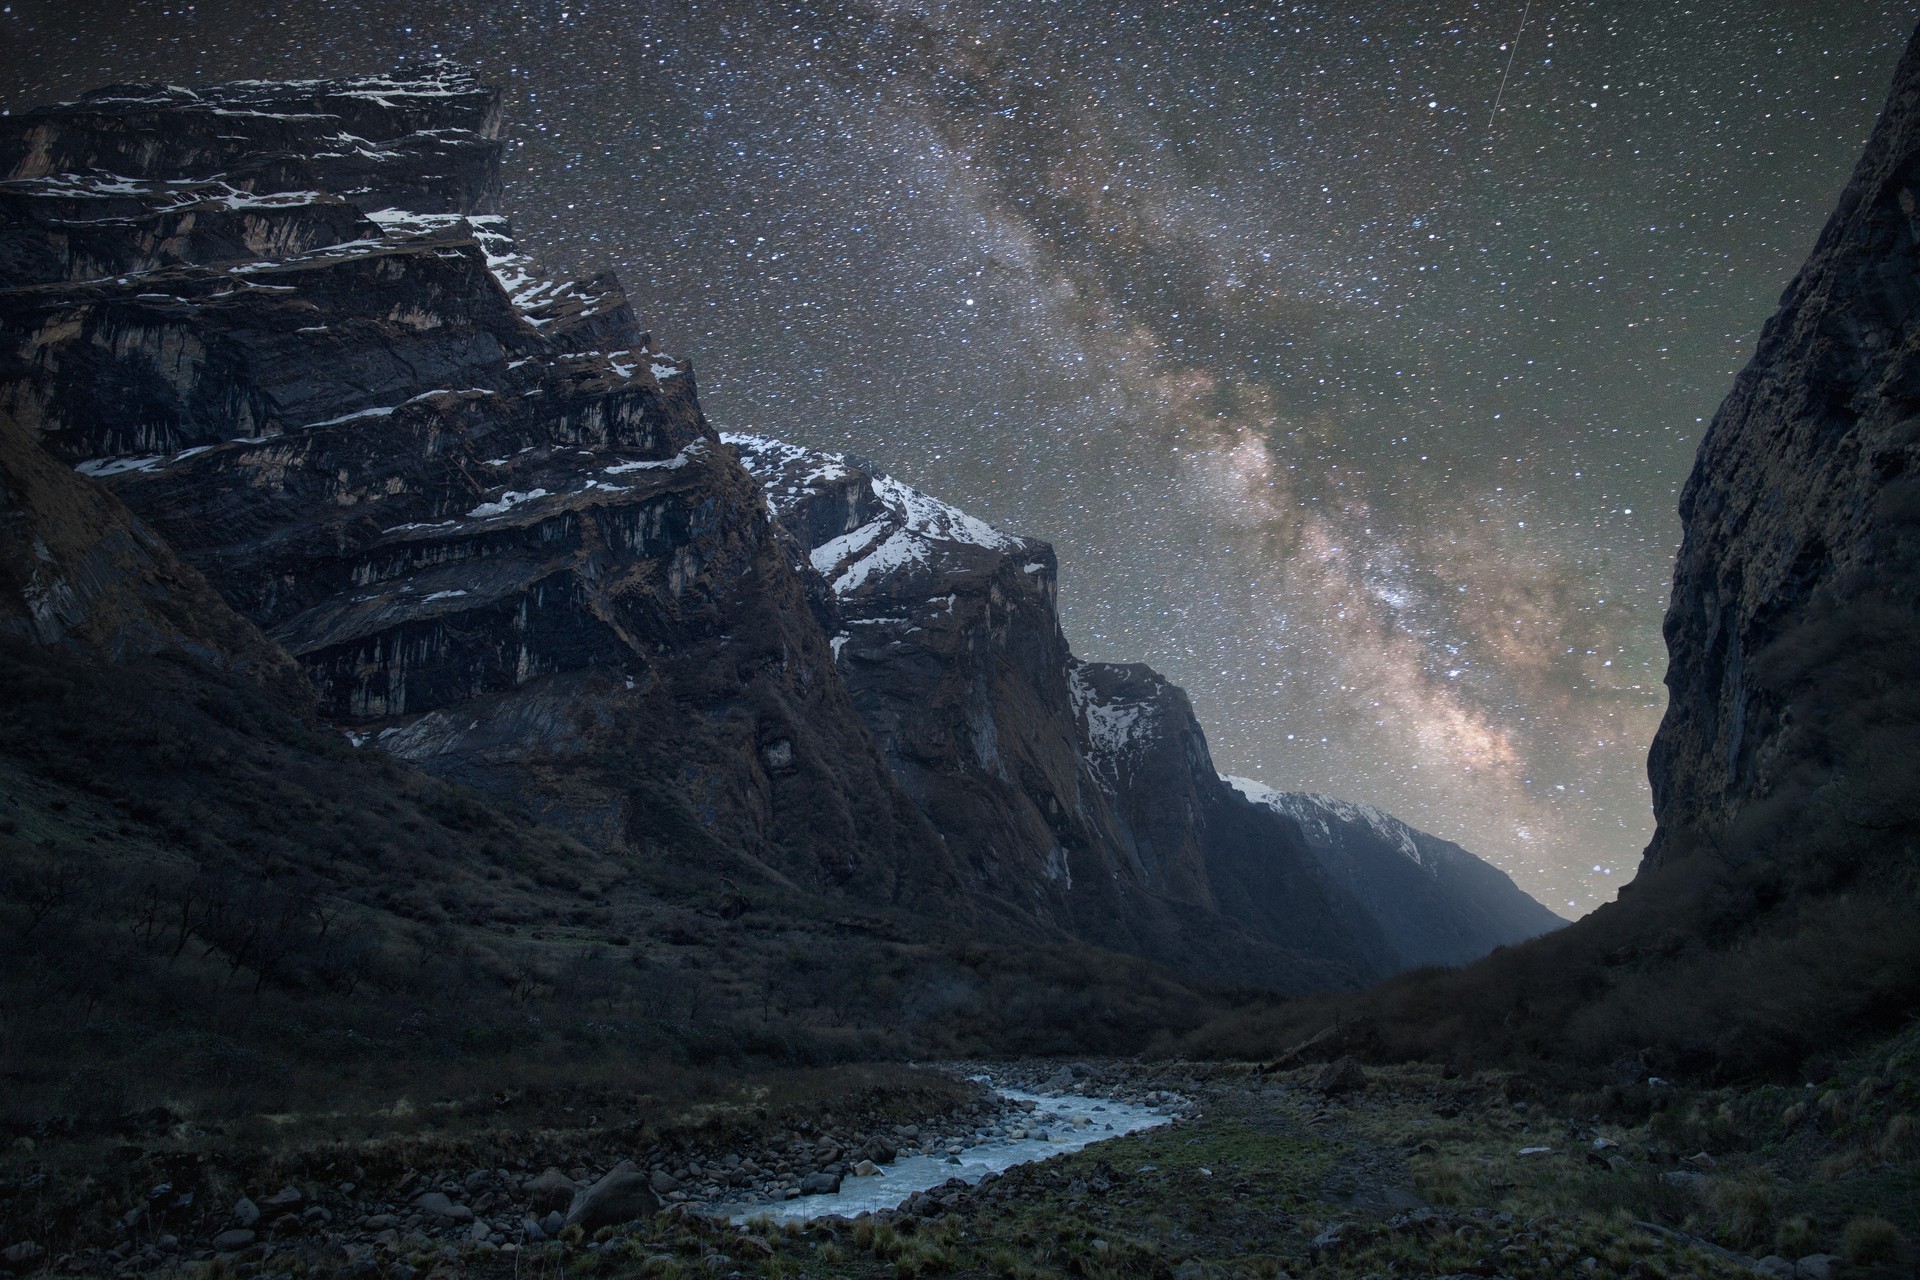 General 1920x1280 Milky Way space nature mountains rocks